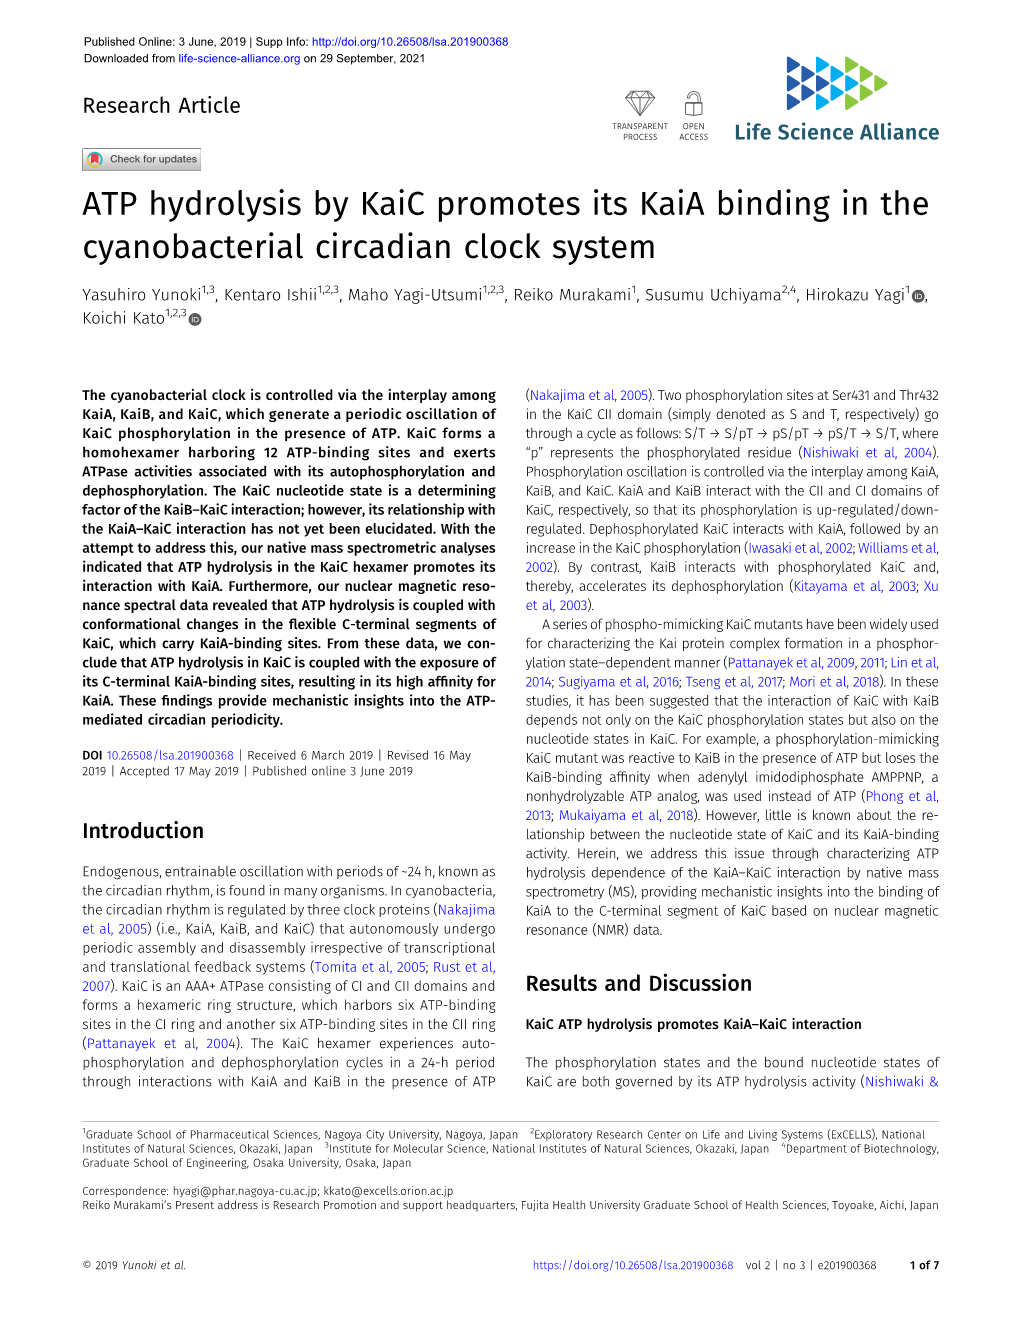 ATP Hydrolysis by Kaic Promotes Its Kaia Binding in the Cyanobacterial Circadian Clock System